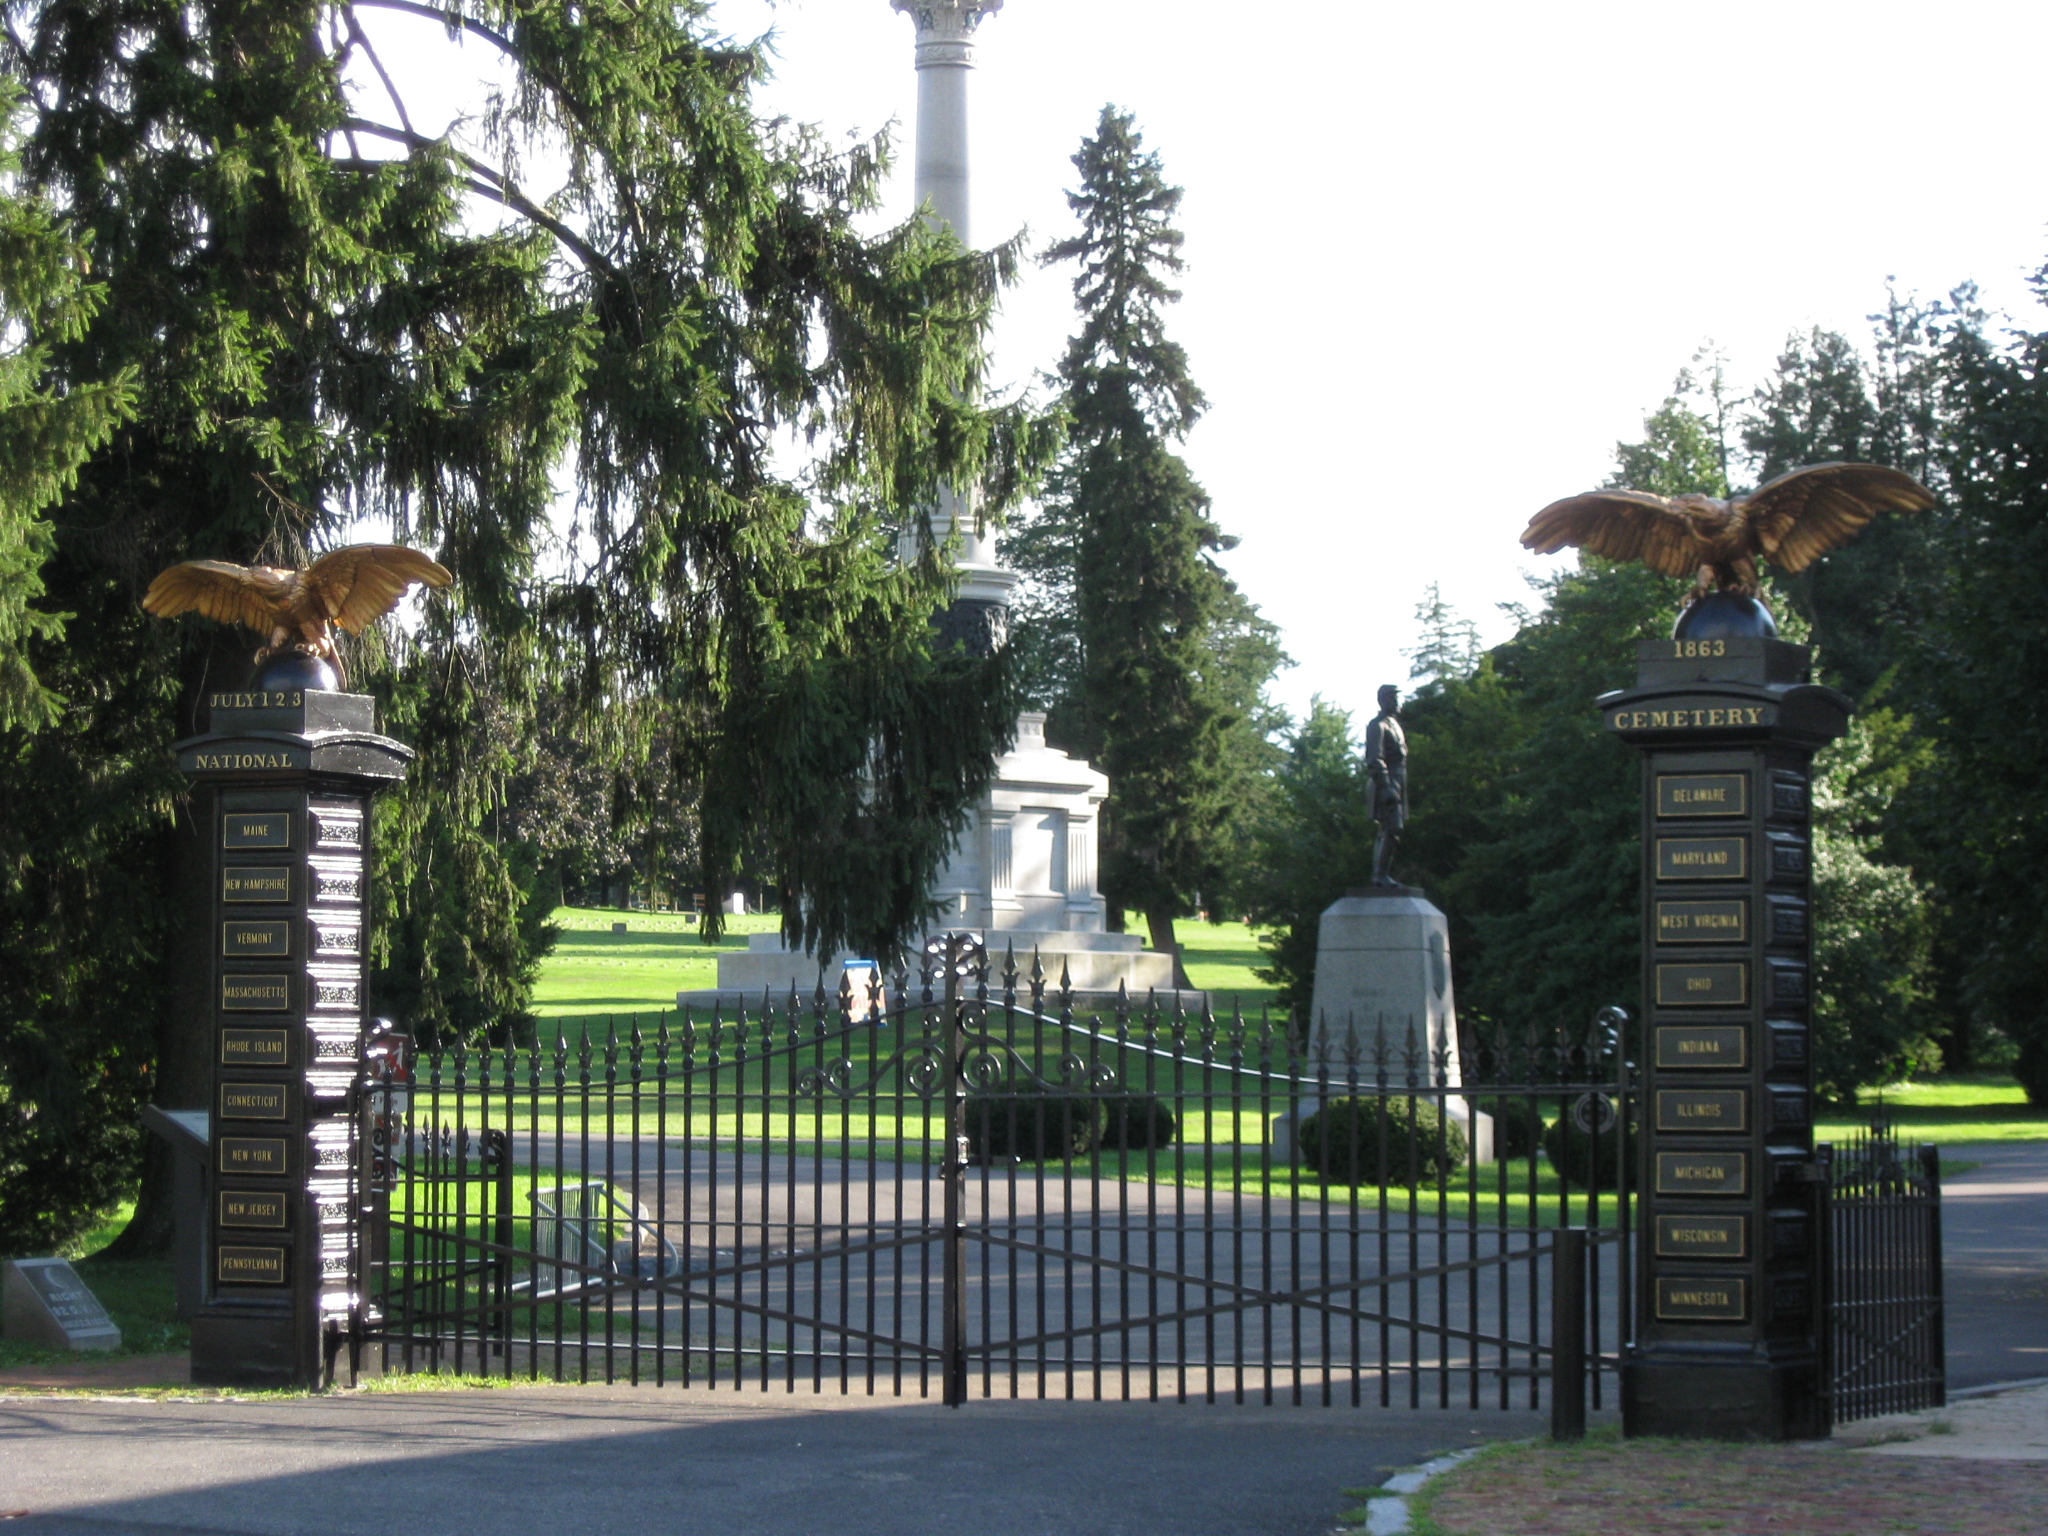 National Cemetery Baltimore Street Entrance Gate Restored and ...